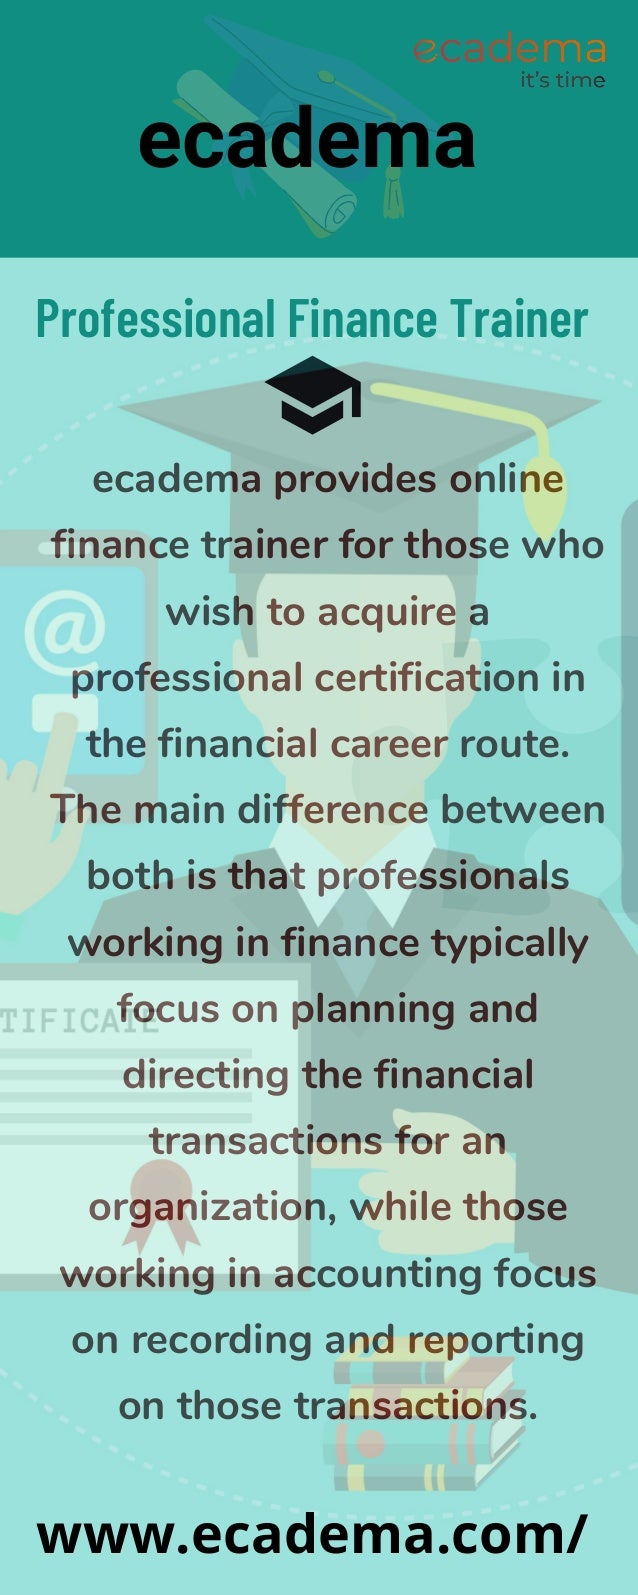 ecadema provides online
finance trainer for those who
wish to acquire a
professional certification in
the financial career route.
The main difference between
both is that professionals
working in finance typically
focus on planning and
directing the financial
transactions for an
organization, while those
working in accounting focus
on recording and reporting
on those transactions.
Professional Finance Trainer
ecadema
www.ecadema.com/
 